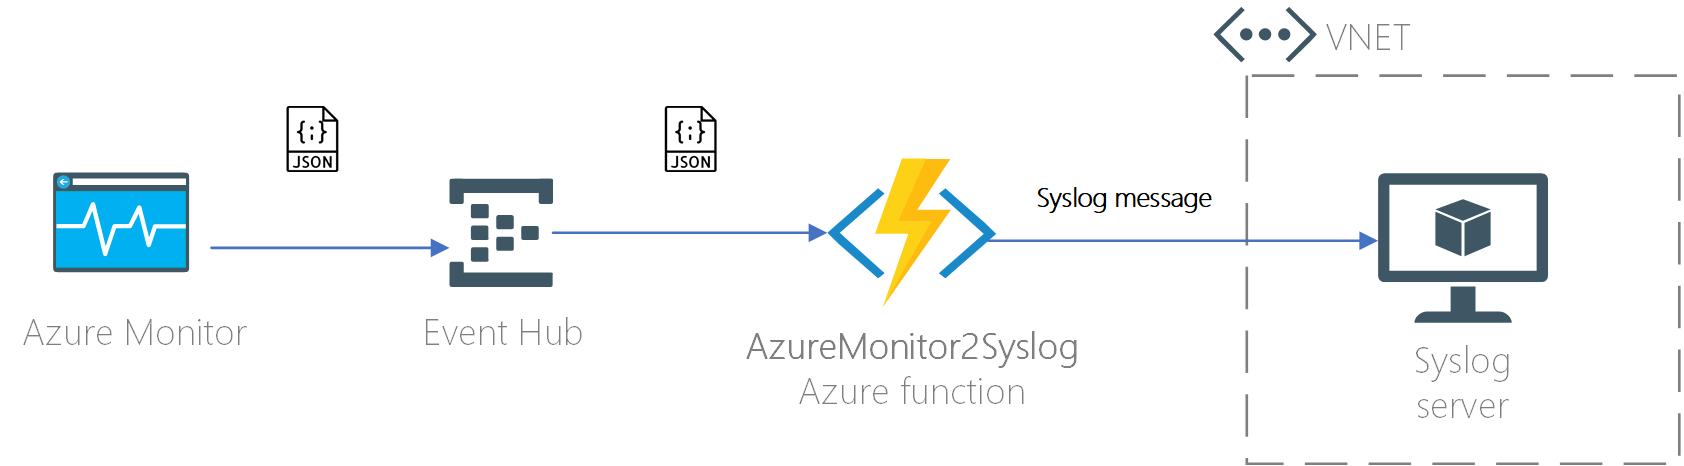 azuremonitor2syslog_overview.png